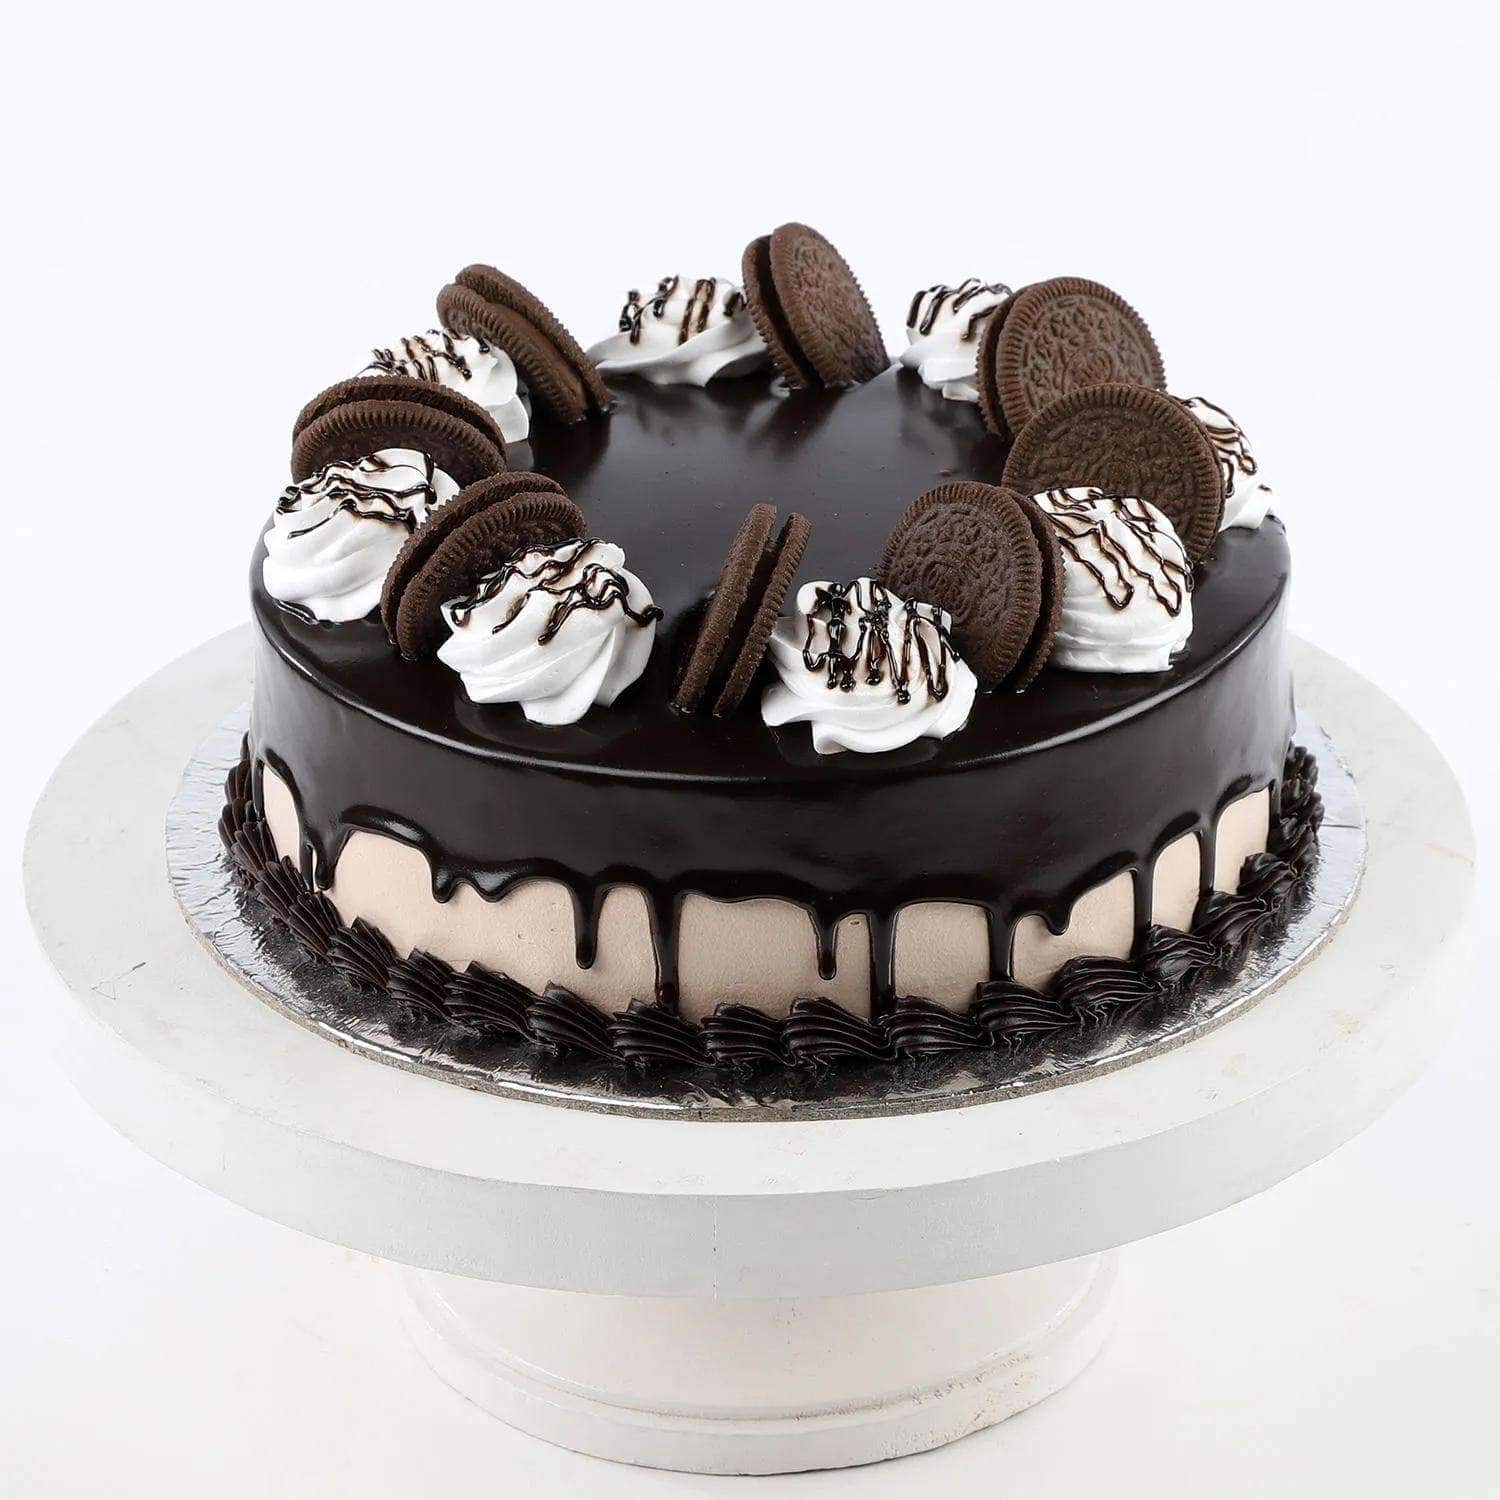 Don't wait until it's too late. Go grab this chocolate cake! Order now on  Swiggy or Zomato #sweetcravings #droolworthy #sweettooth #cake  #bakersden... | By Baker's DenFacebook